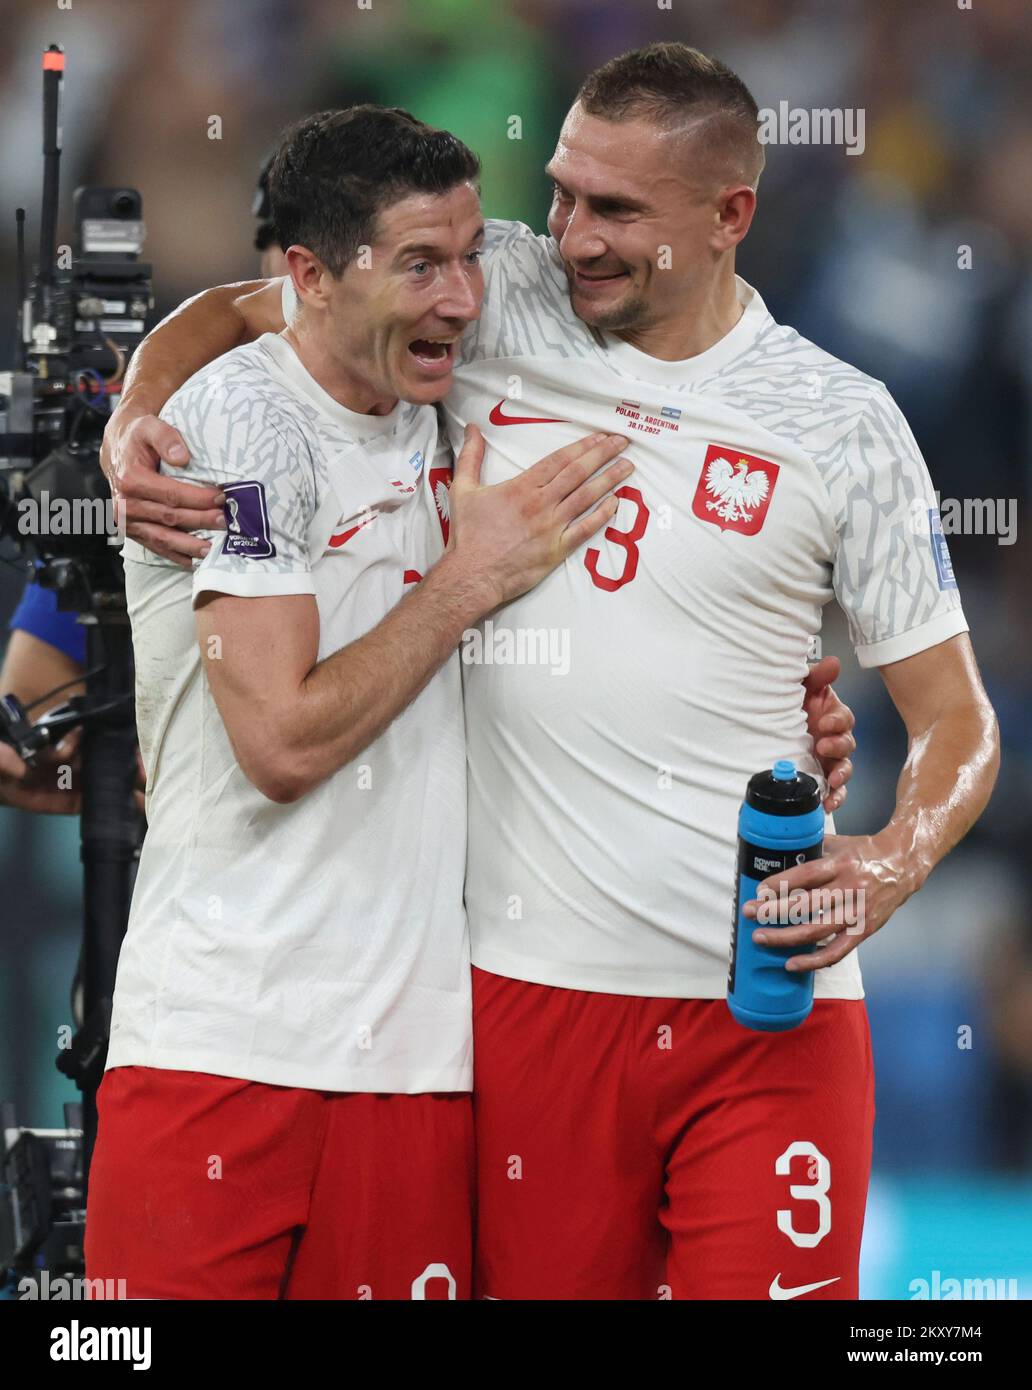 Doha, Qatar. 30th Nov, 2022. Robert Lewandowski (L) and Artur Jedrzejczyk of Poland celebrate their team advancing to the round of 16 after the Group C match between Poland and Argentina at the 2022 FIFA World Cup at Stadium 974 in Doha, Qatar, Nov. 30, 2022. Credit: Cao Can/Xinhua/Alamy Live News Stock Photo